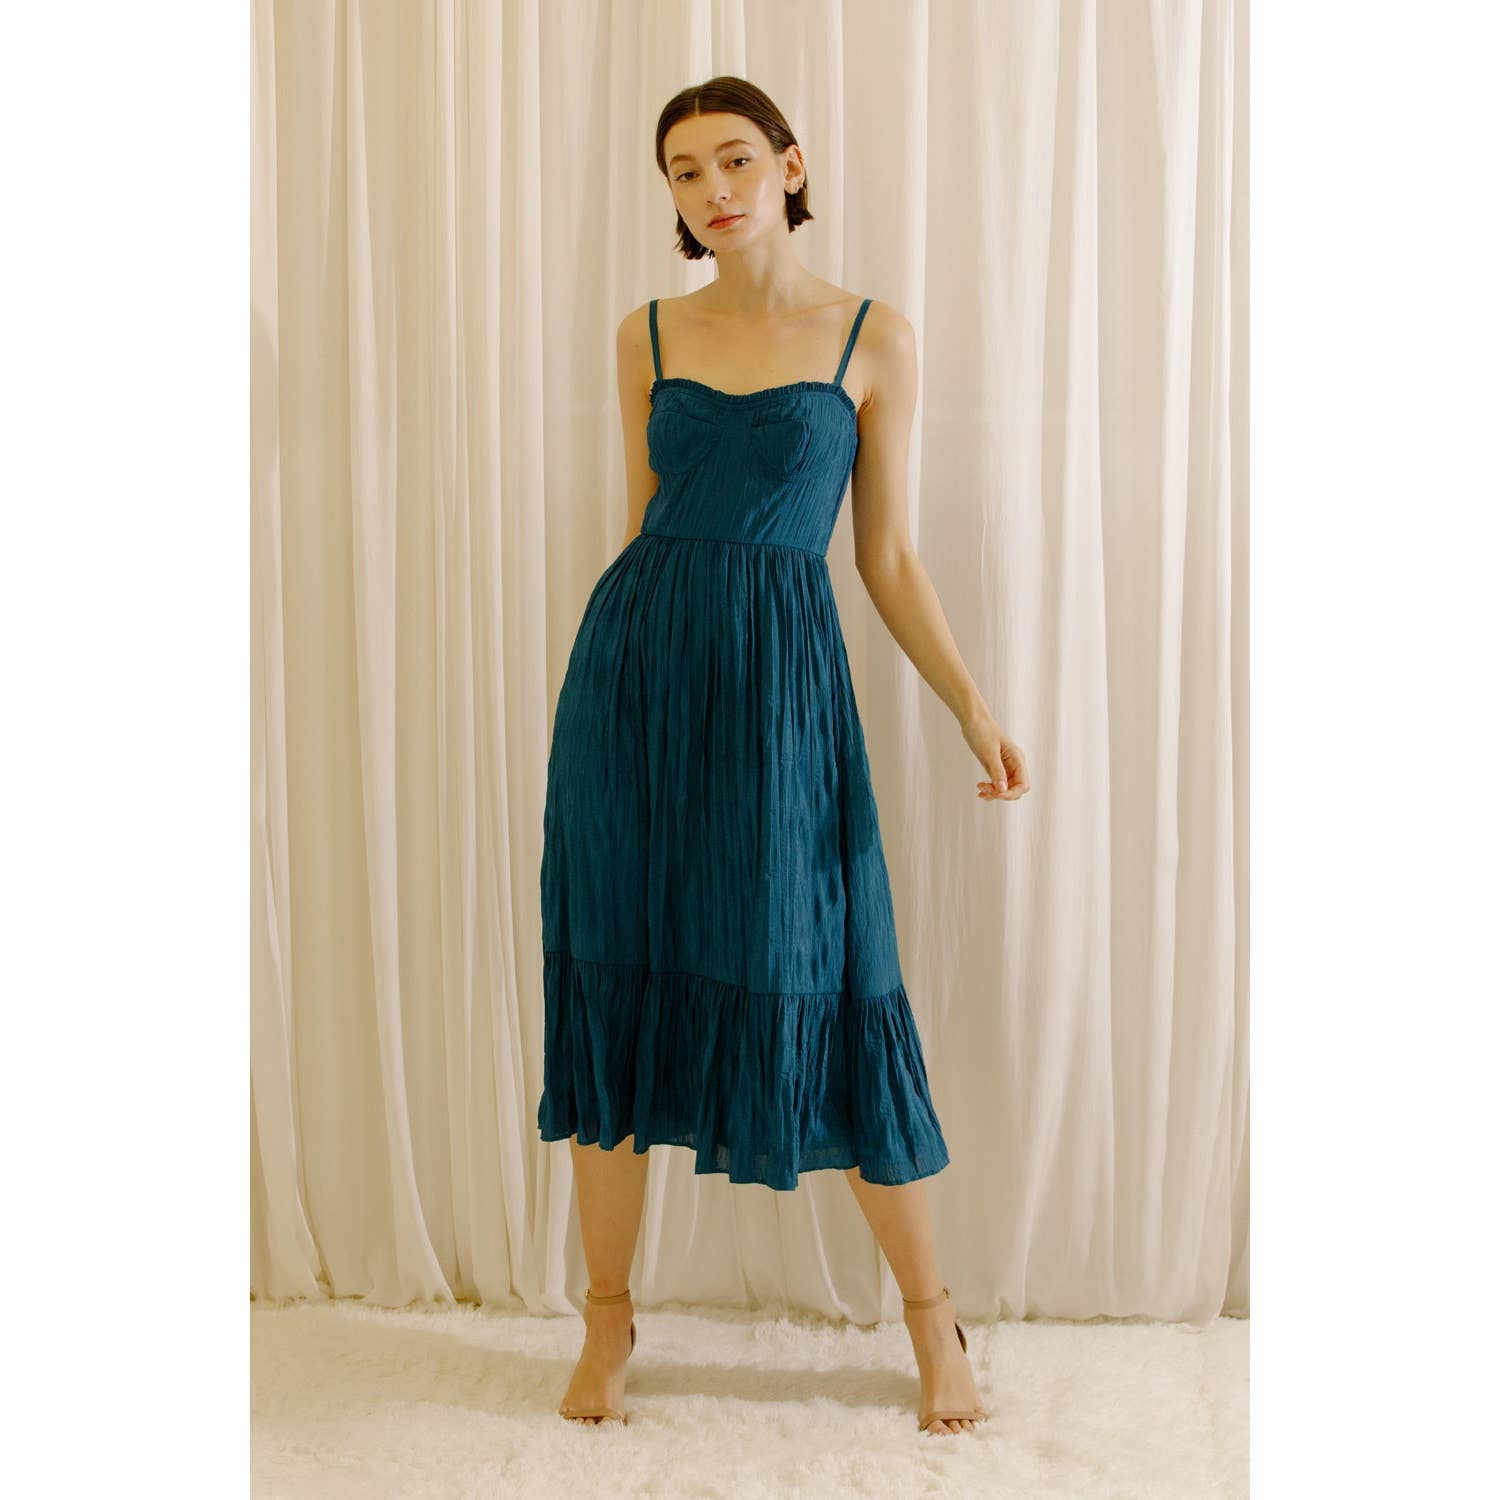 Monochromatic Teal Bustier Dress with or without Straps & Ruffled Hem